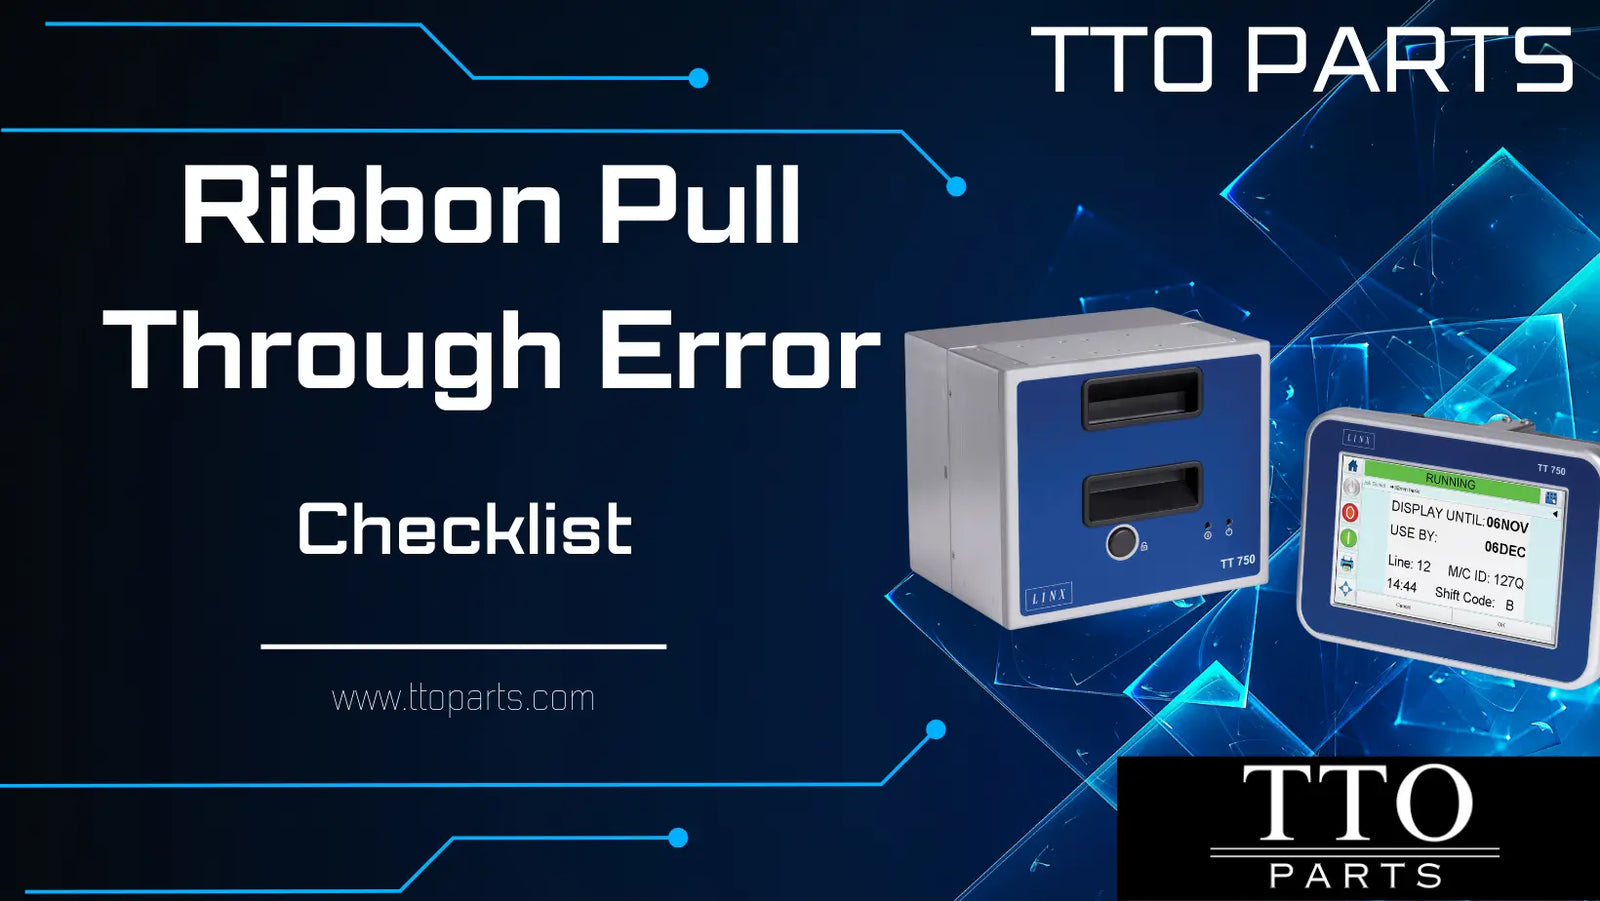 Troubleshooting the E3206 Ribbon Pull-Through on Videojet or Linx Printers